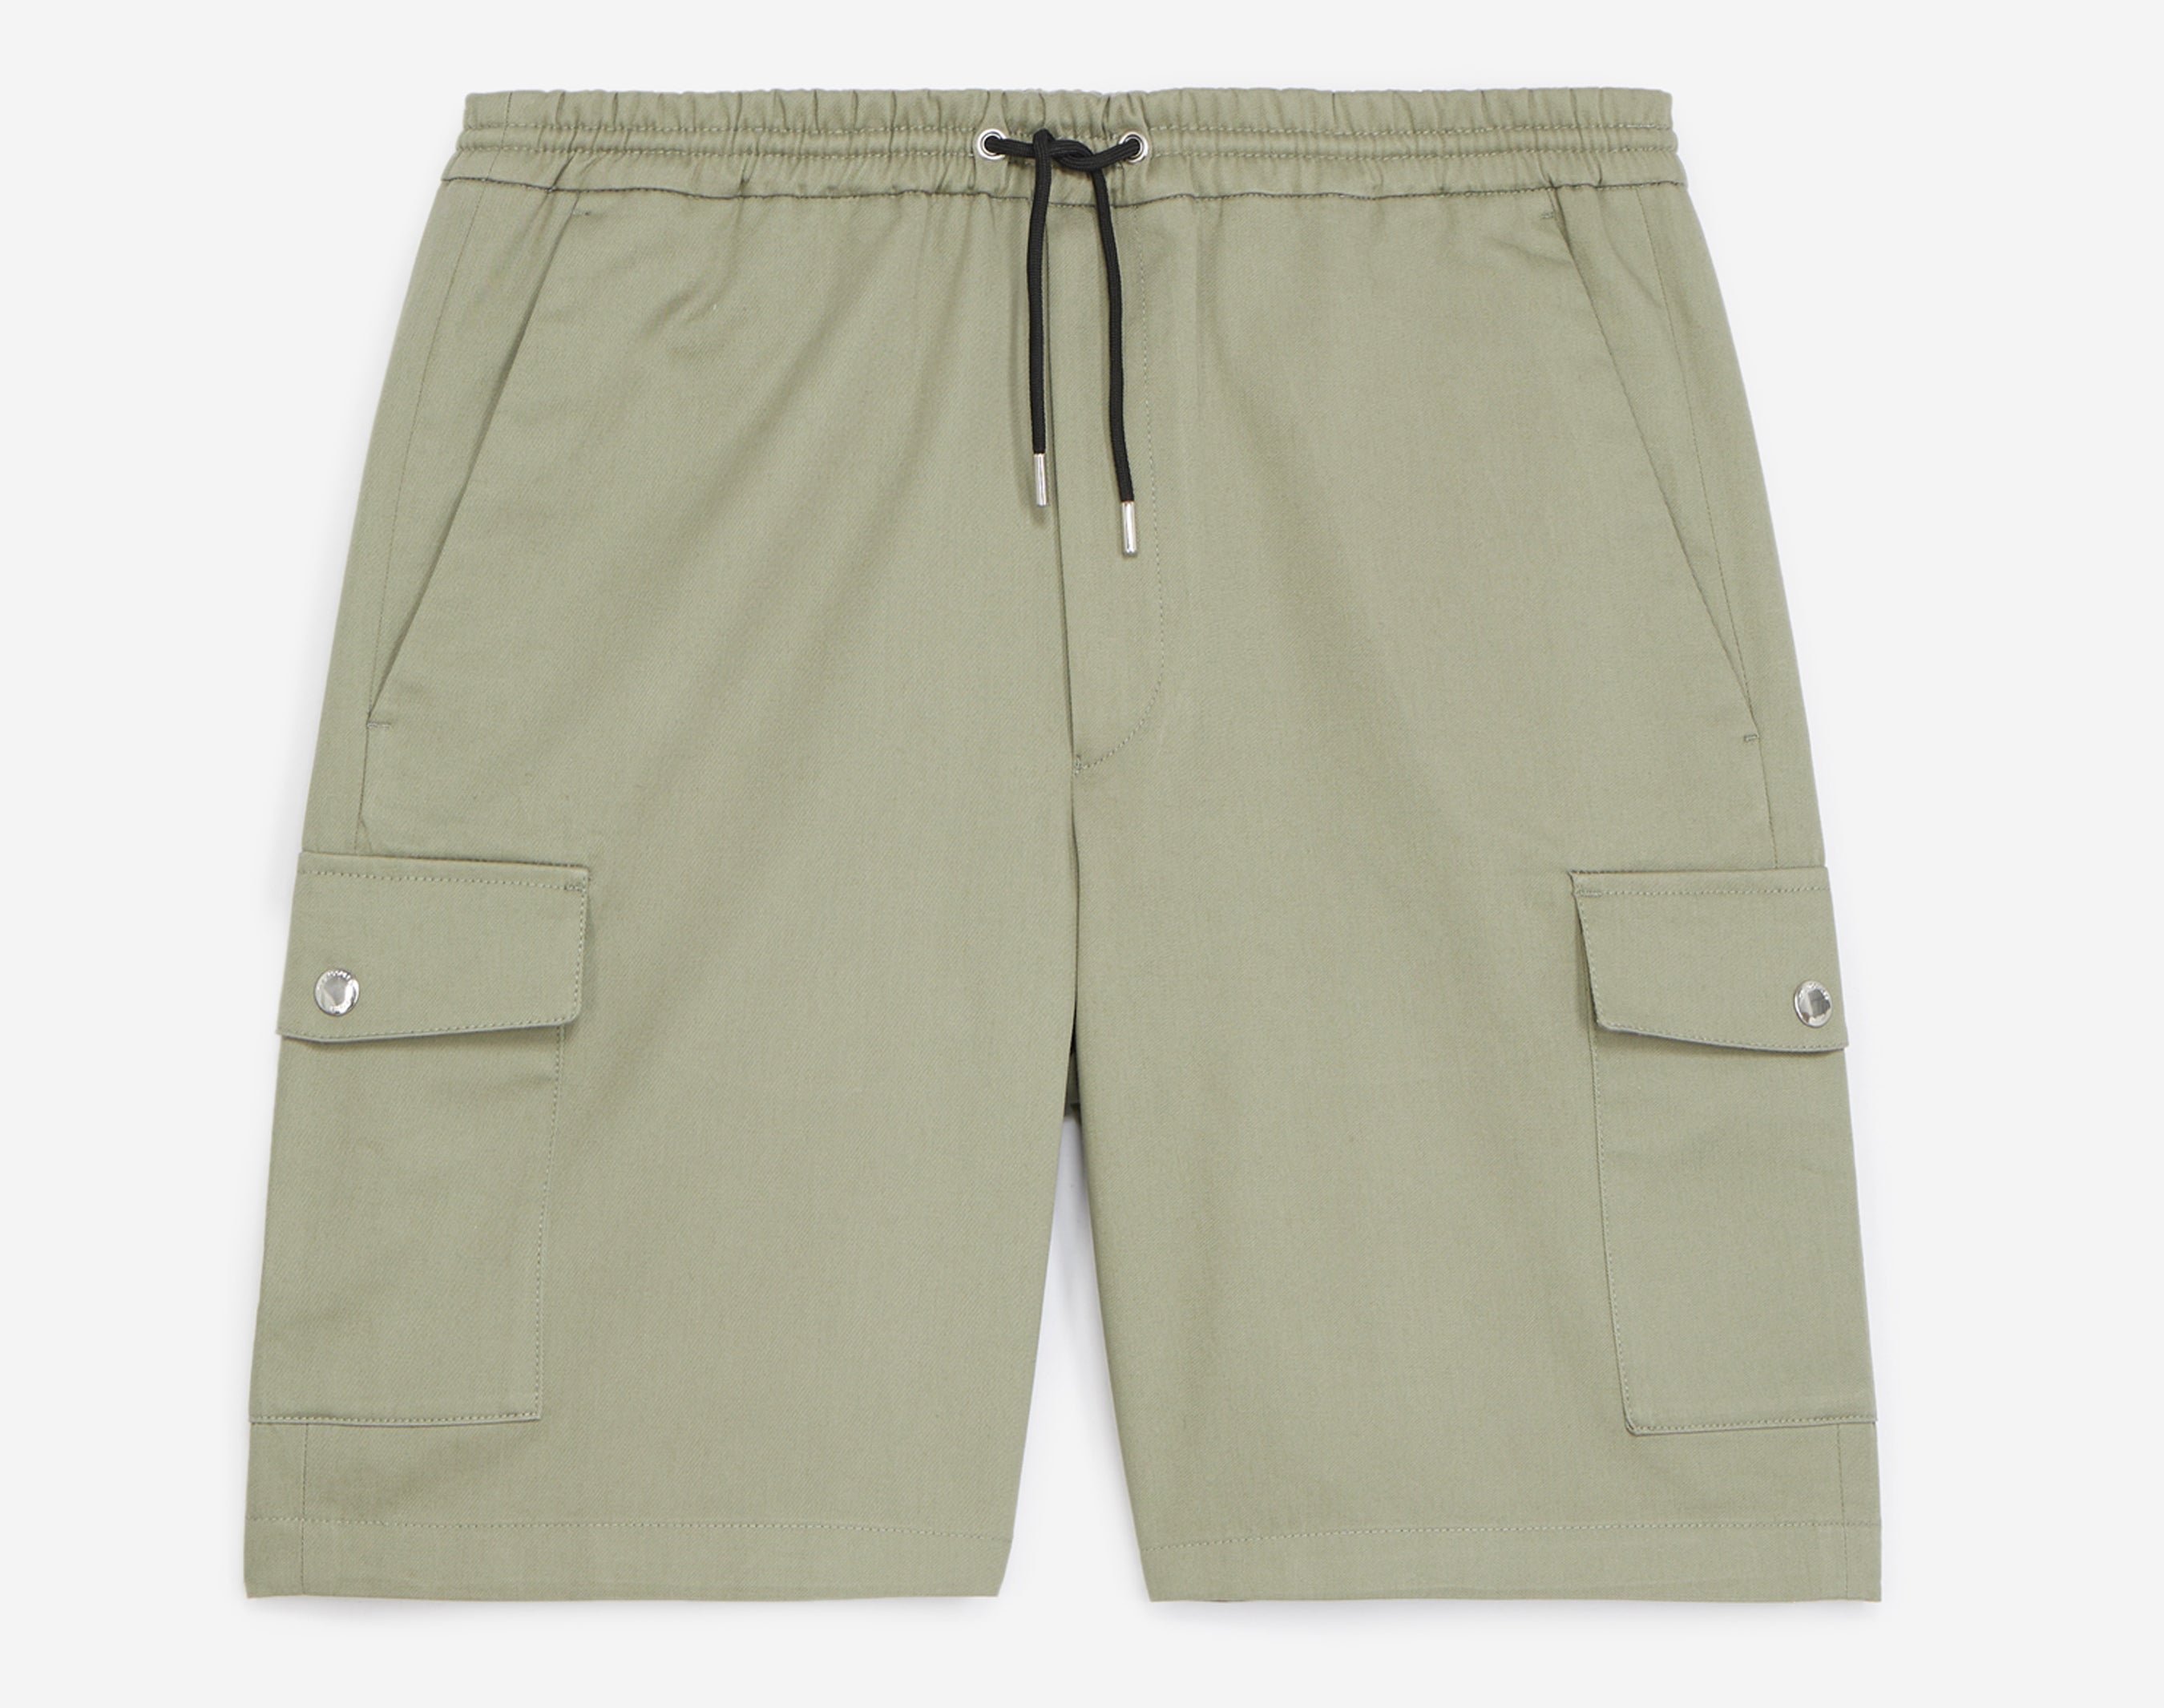 The Kooples Flowing Khaki Shorts with Cargo Pockets